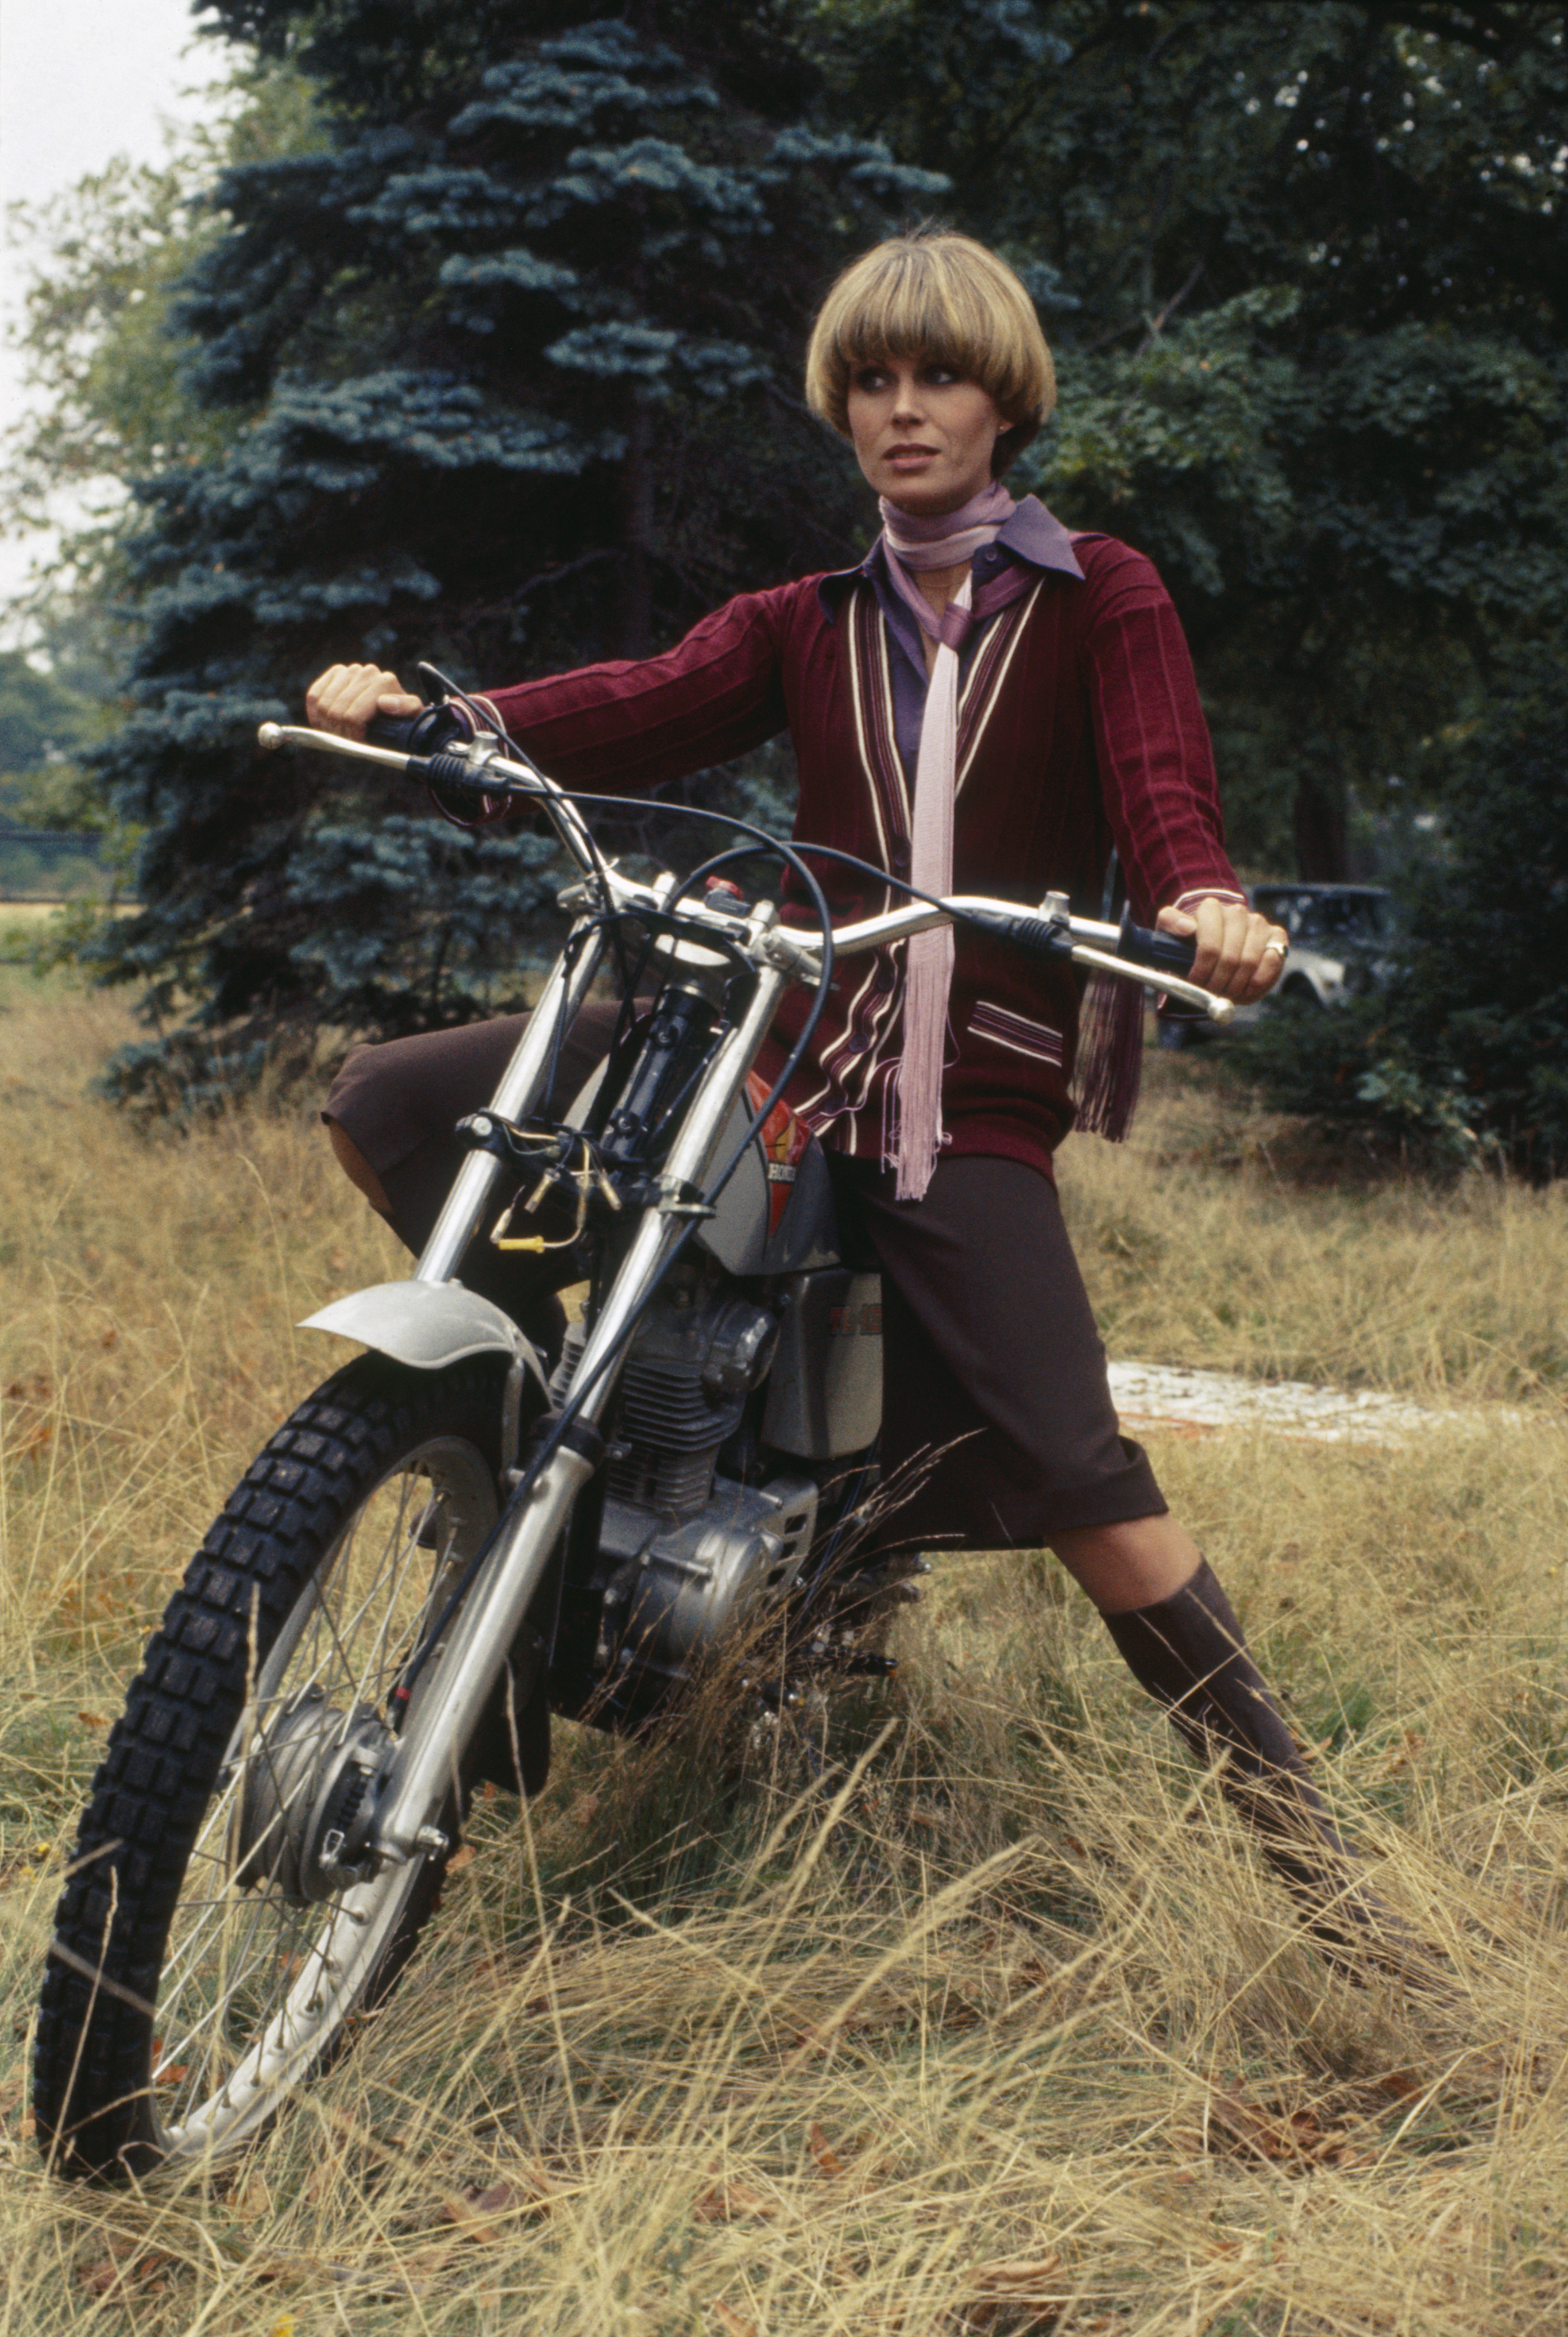 Joanna Lumley in her role as Purdey in 'The New Avengers', in 1976 | Source: Getty Images